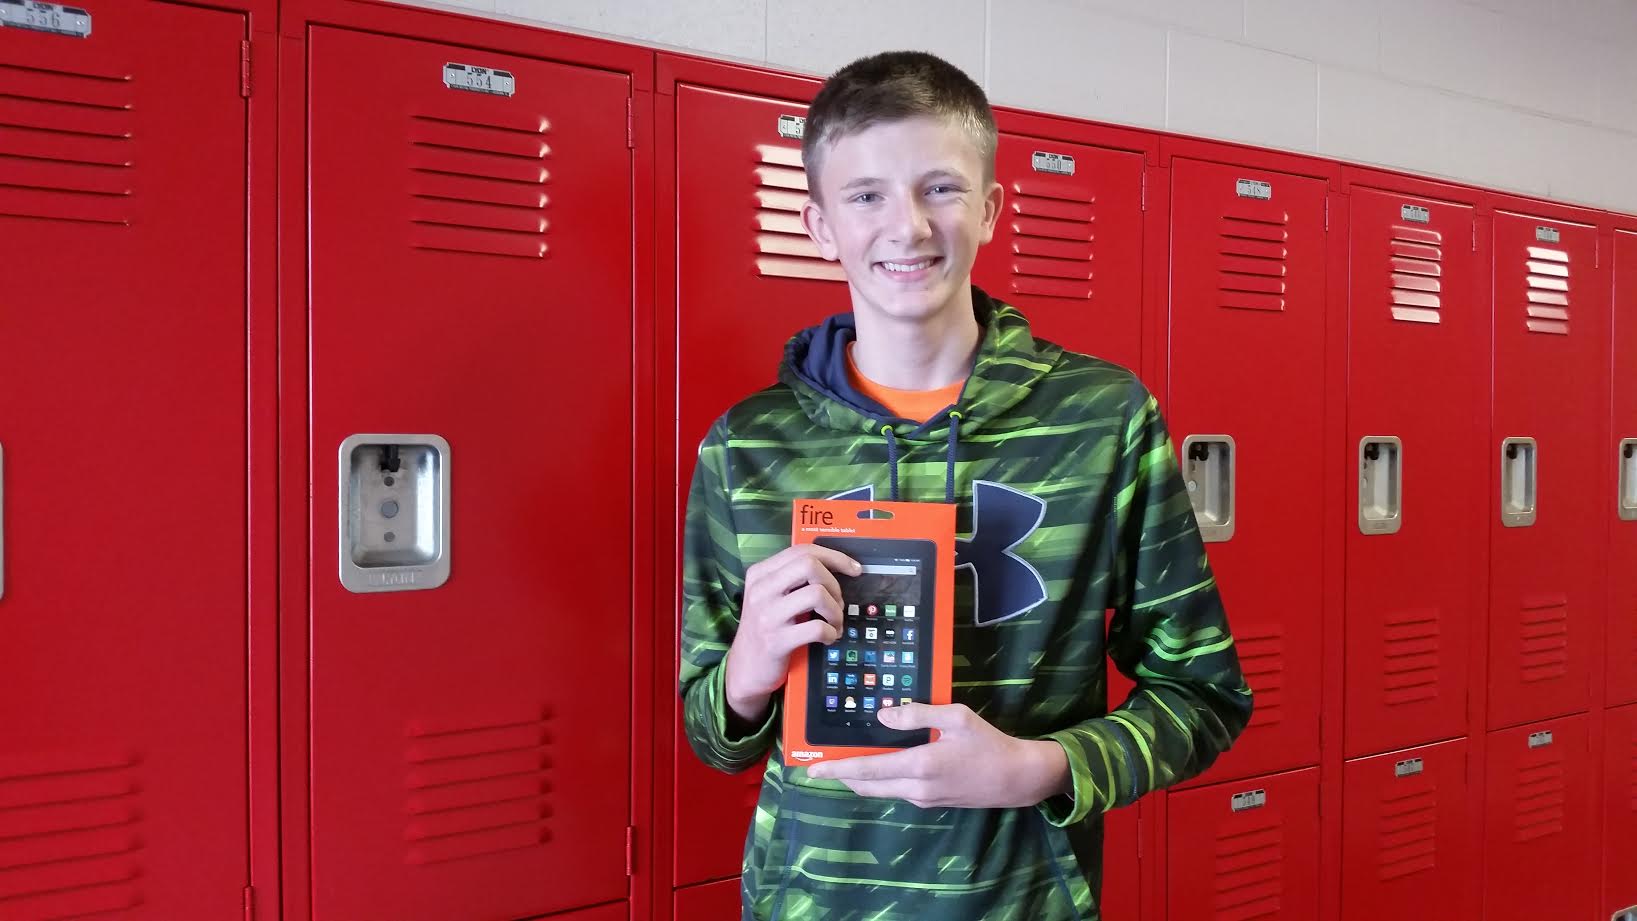 Robbie Crossman was chosen as the winner of the Kindle Fire presented by the Explorers program at the Manufacturing Experience.